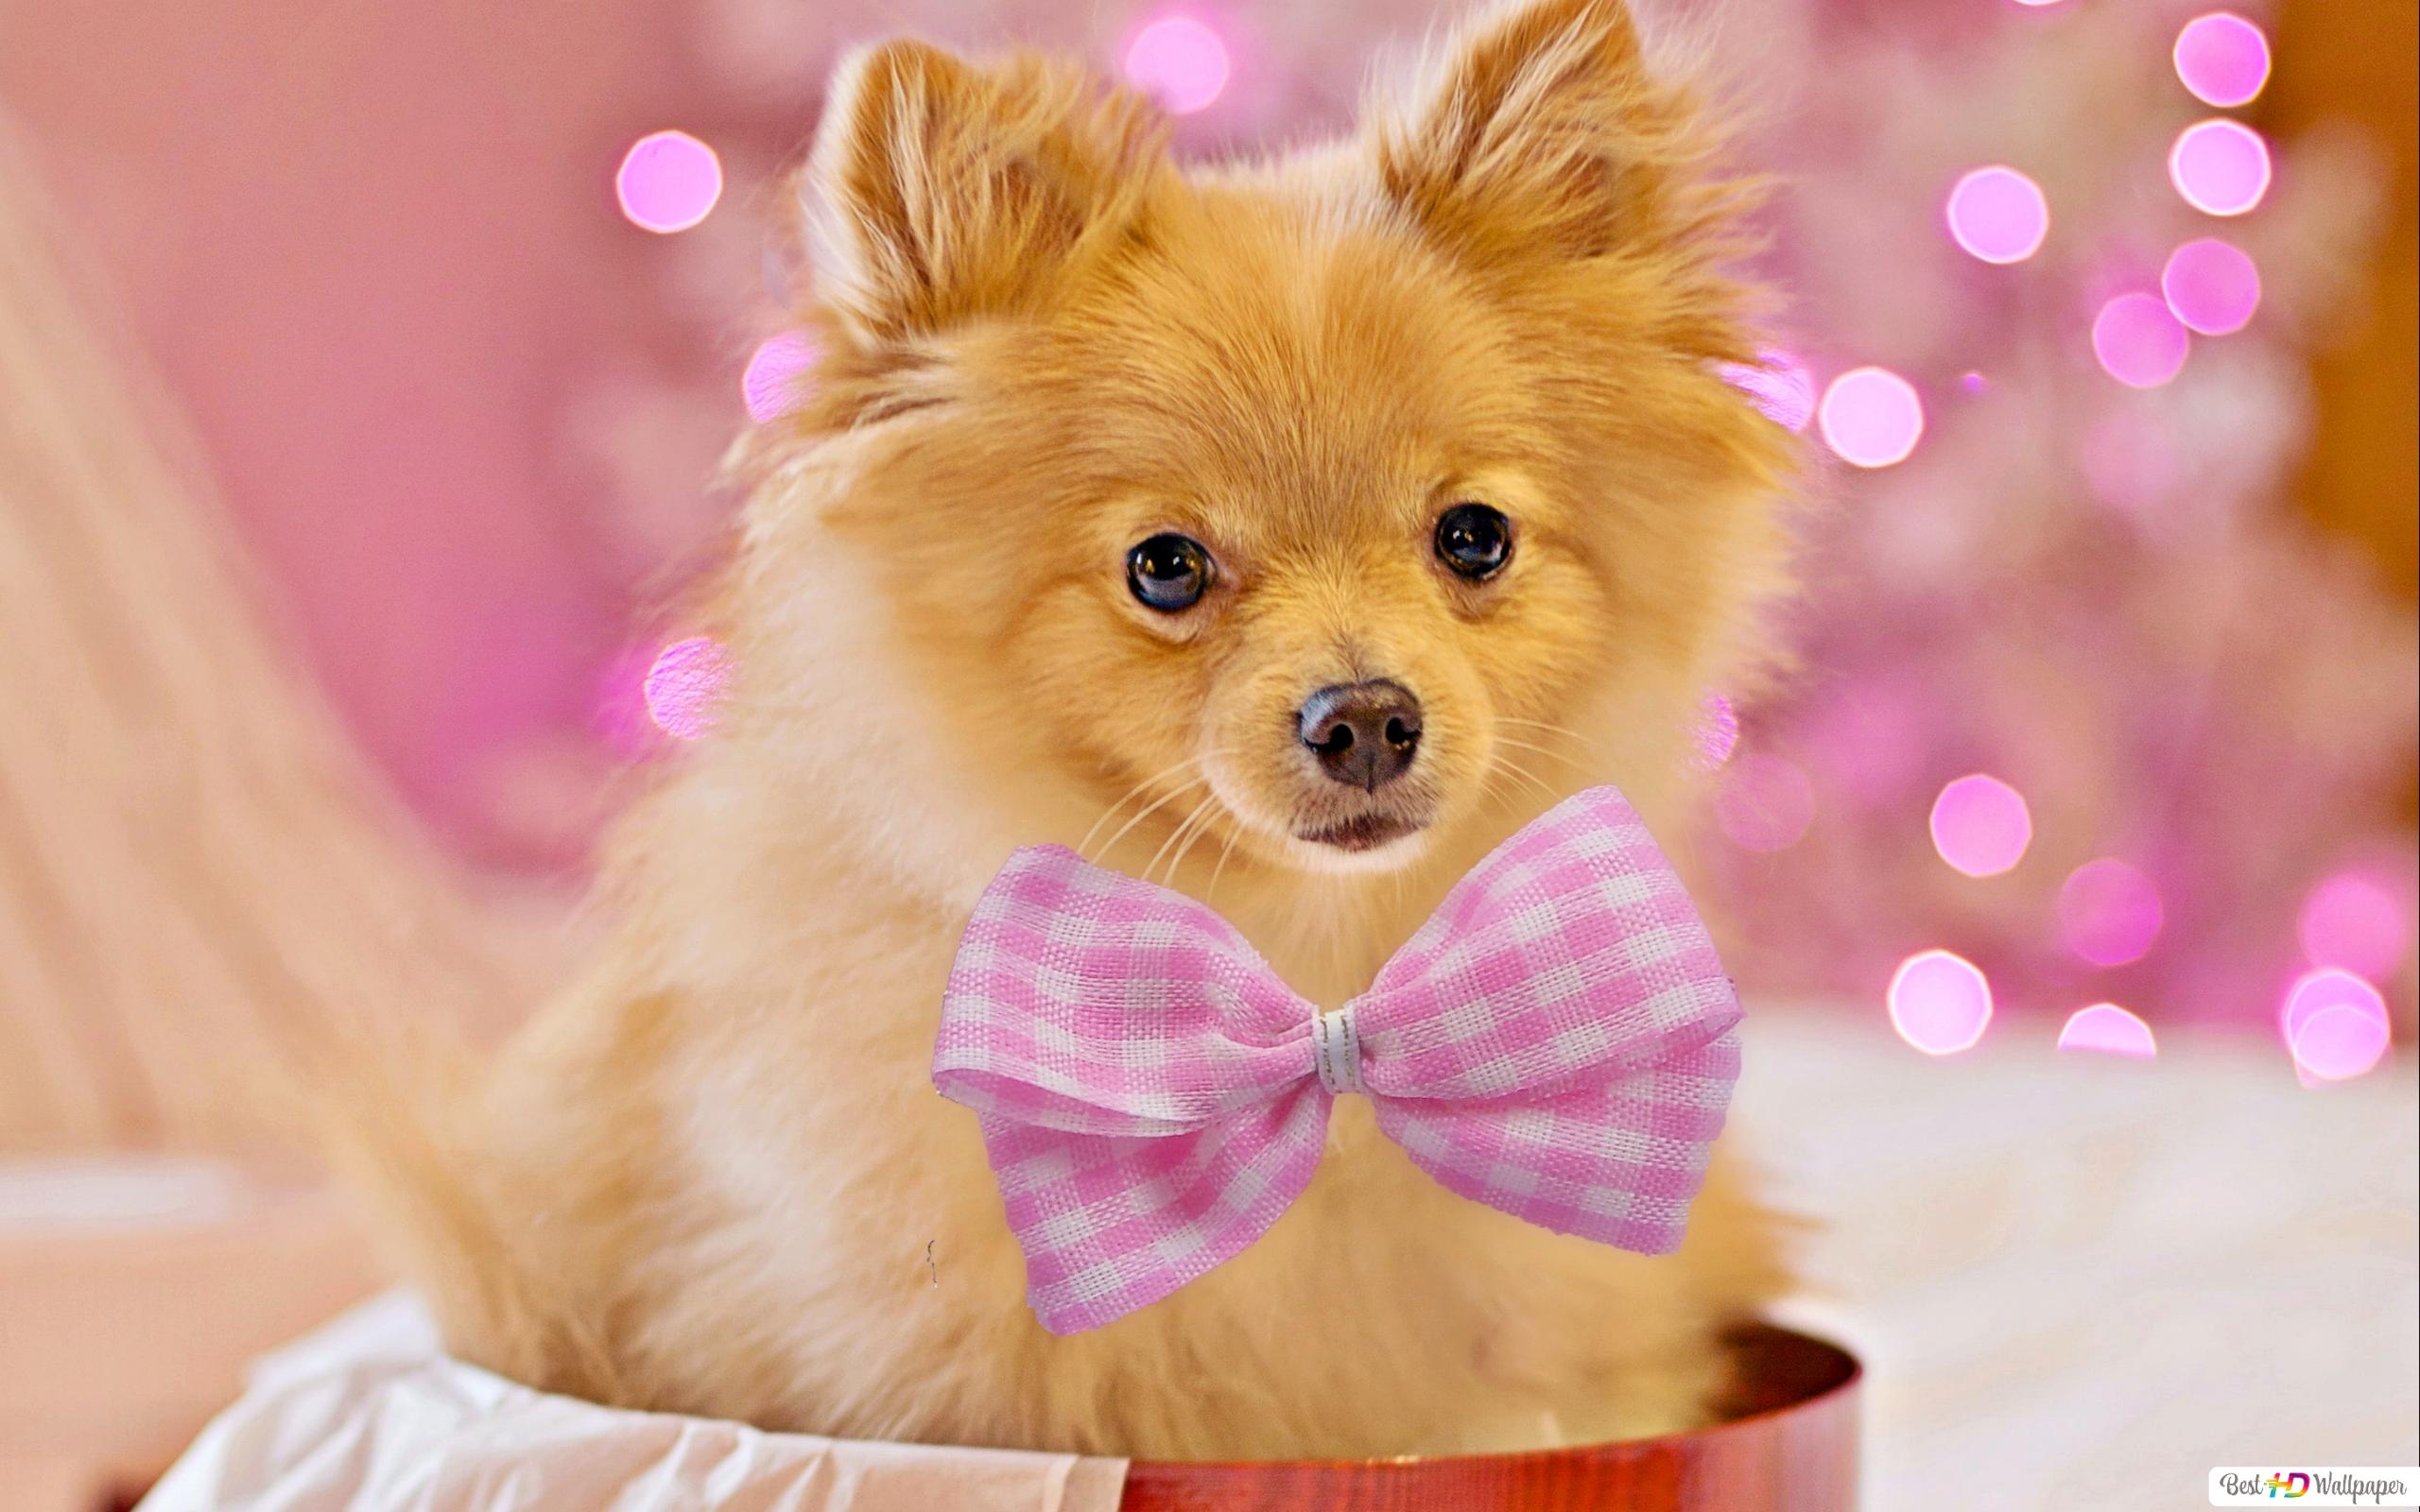 Cutest pet puppy as a gift on holidays with pink lights as background HD wallpaper download